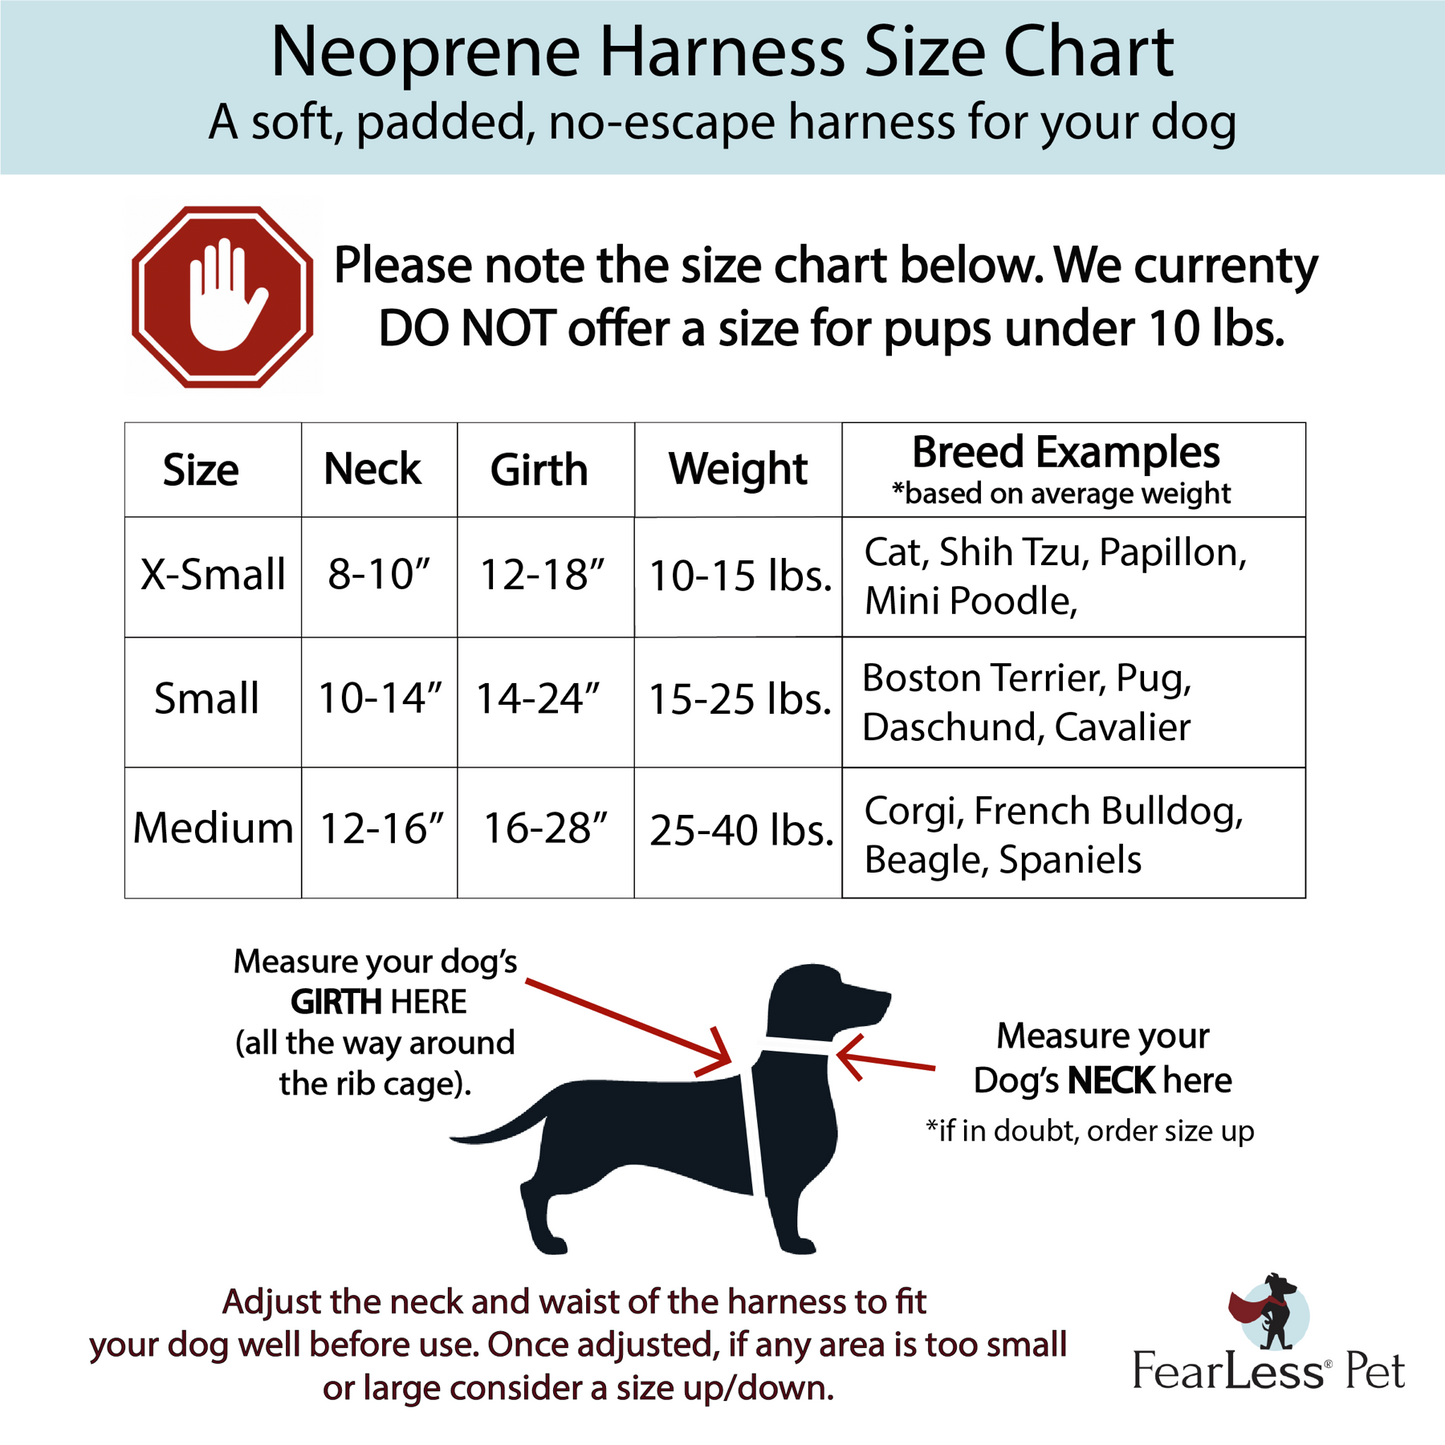 a size chart for fearless pet dog harnesses